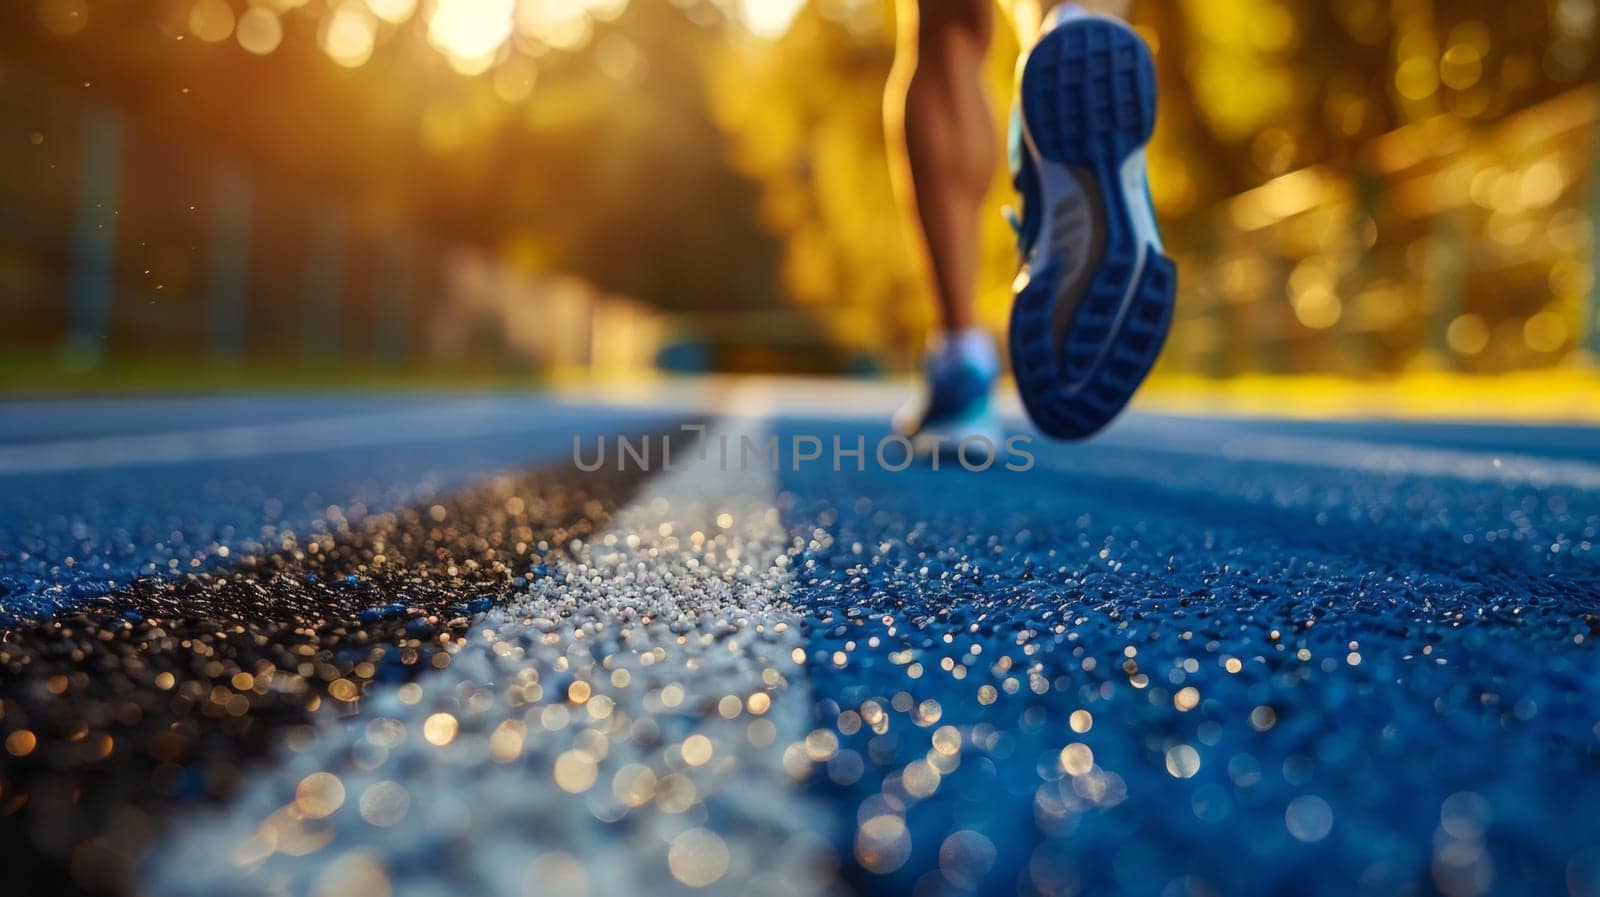 A close up of a person's feet running on the track, AI by starush